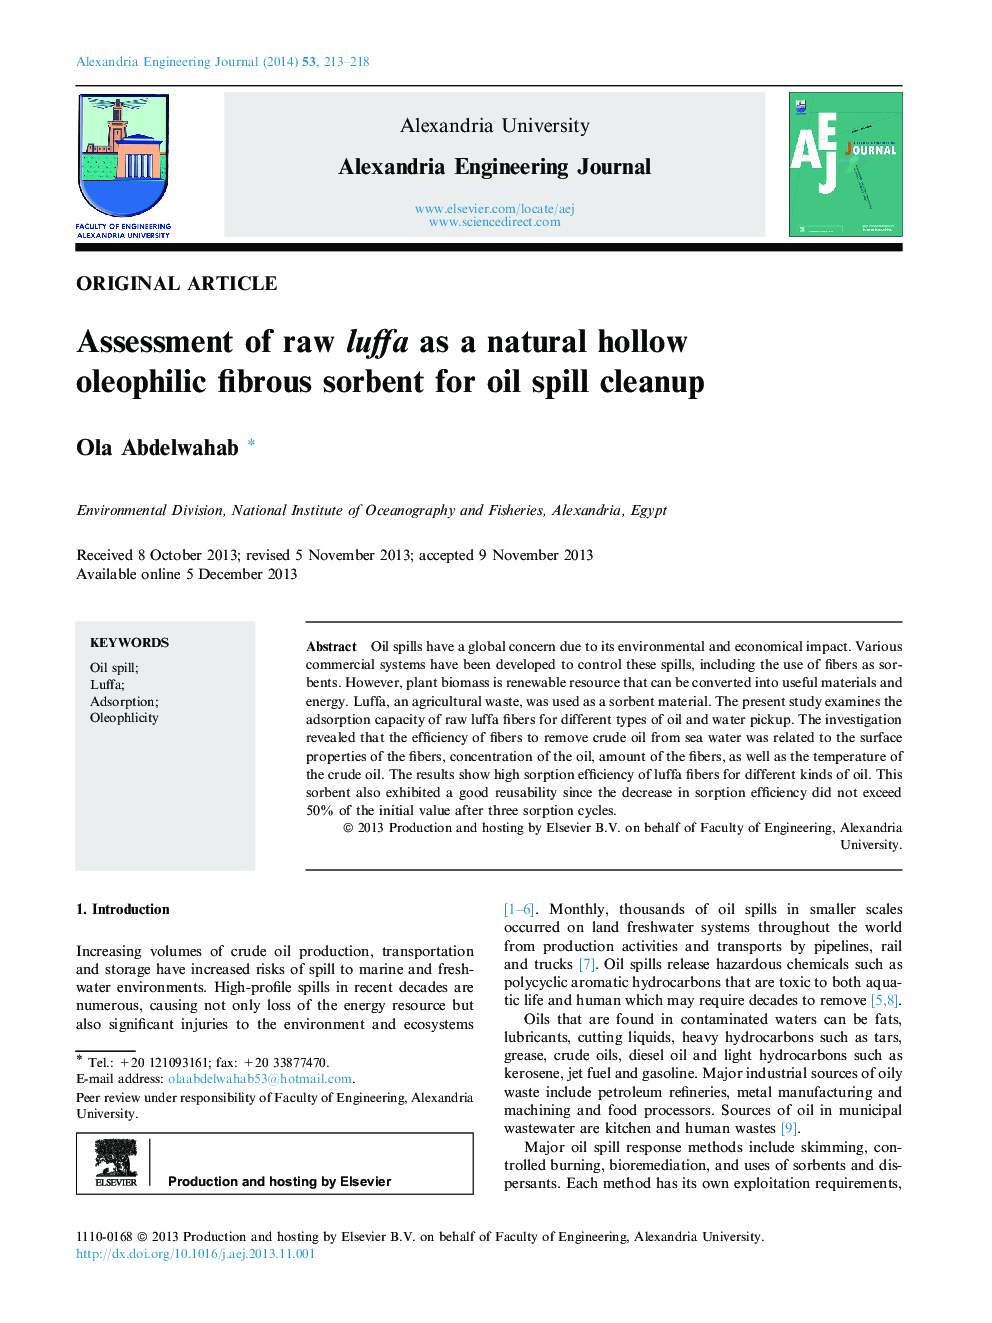 Assessment of raw luffa as a natural hollow oleophilic fibrous sorbent for oil spill cleanup